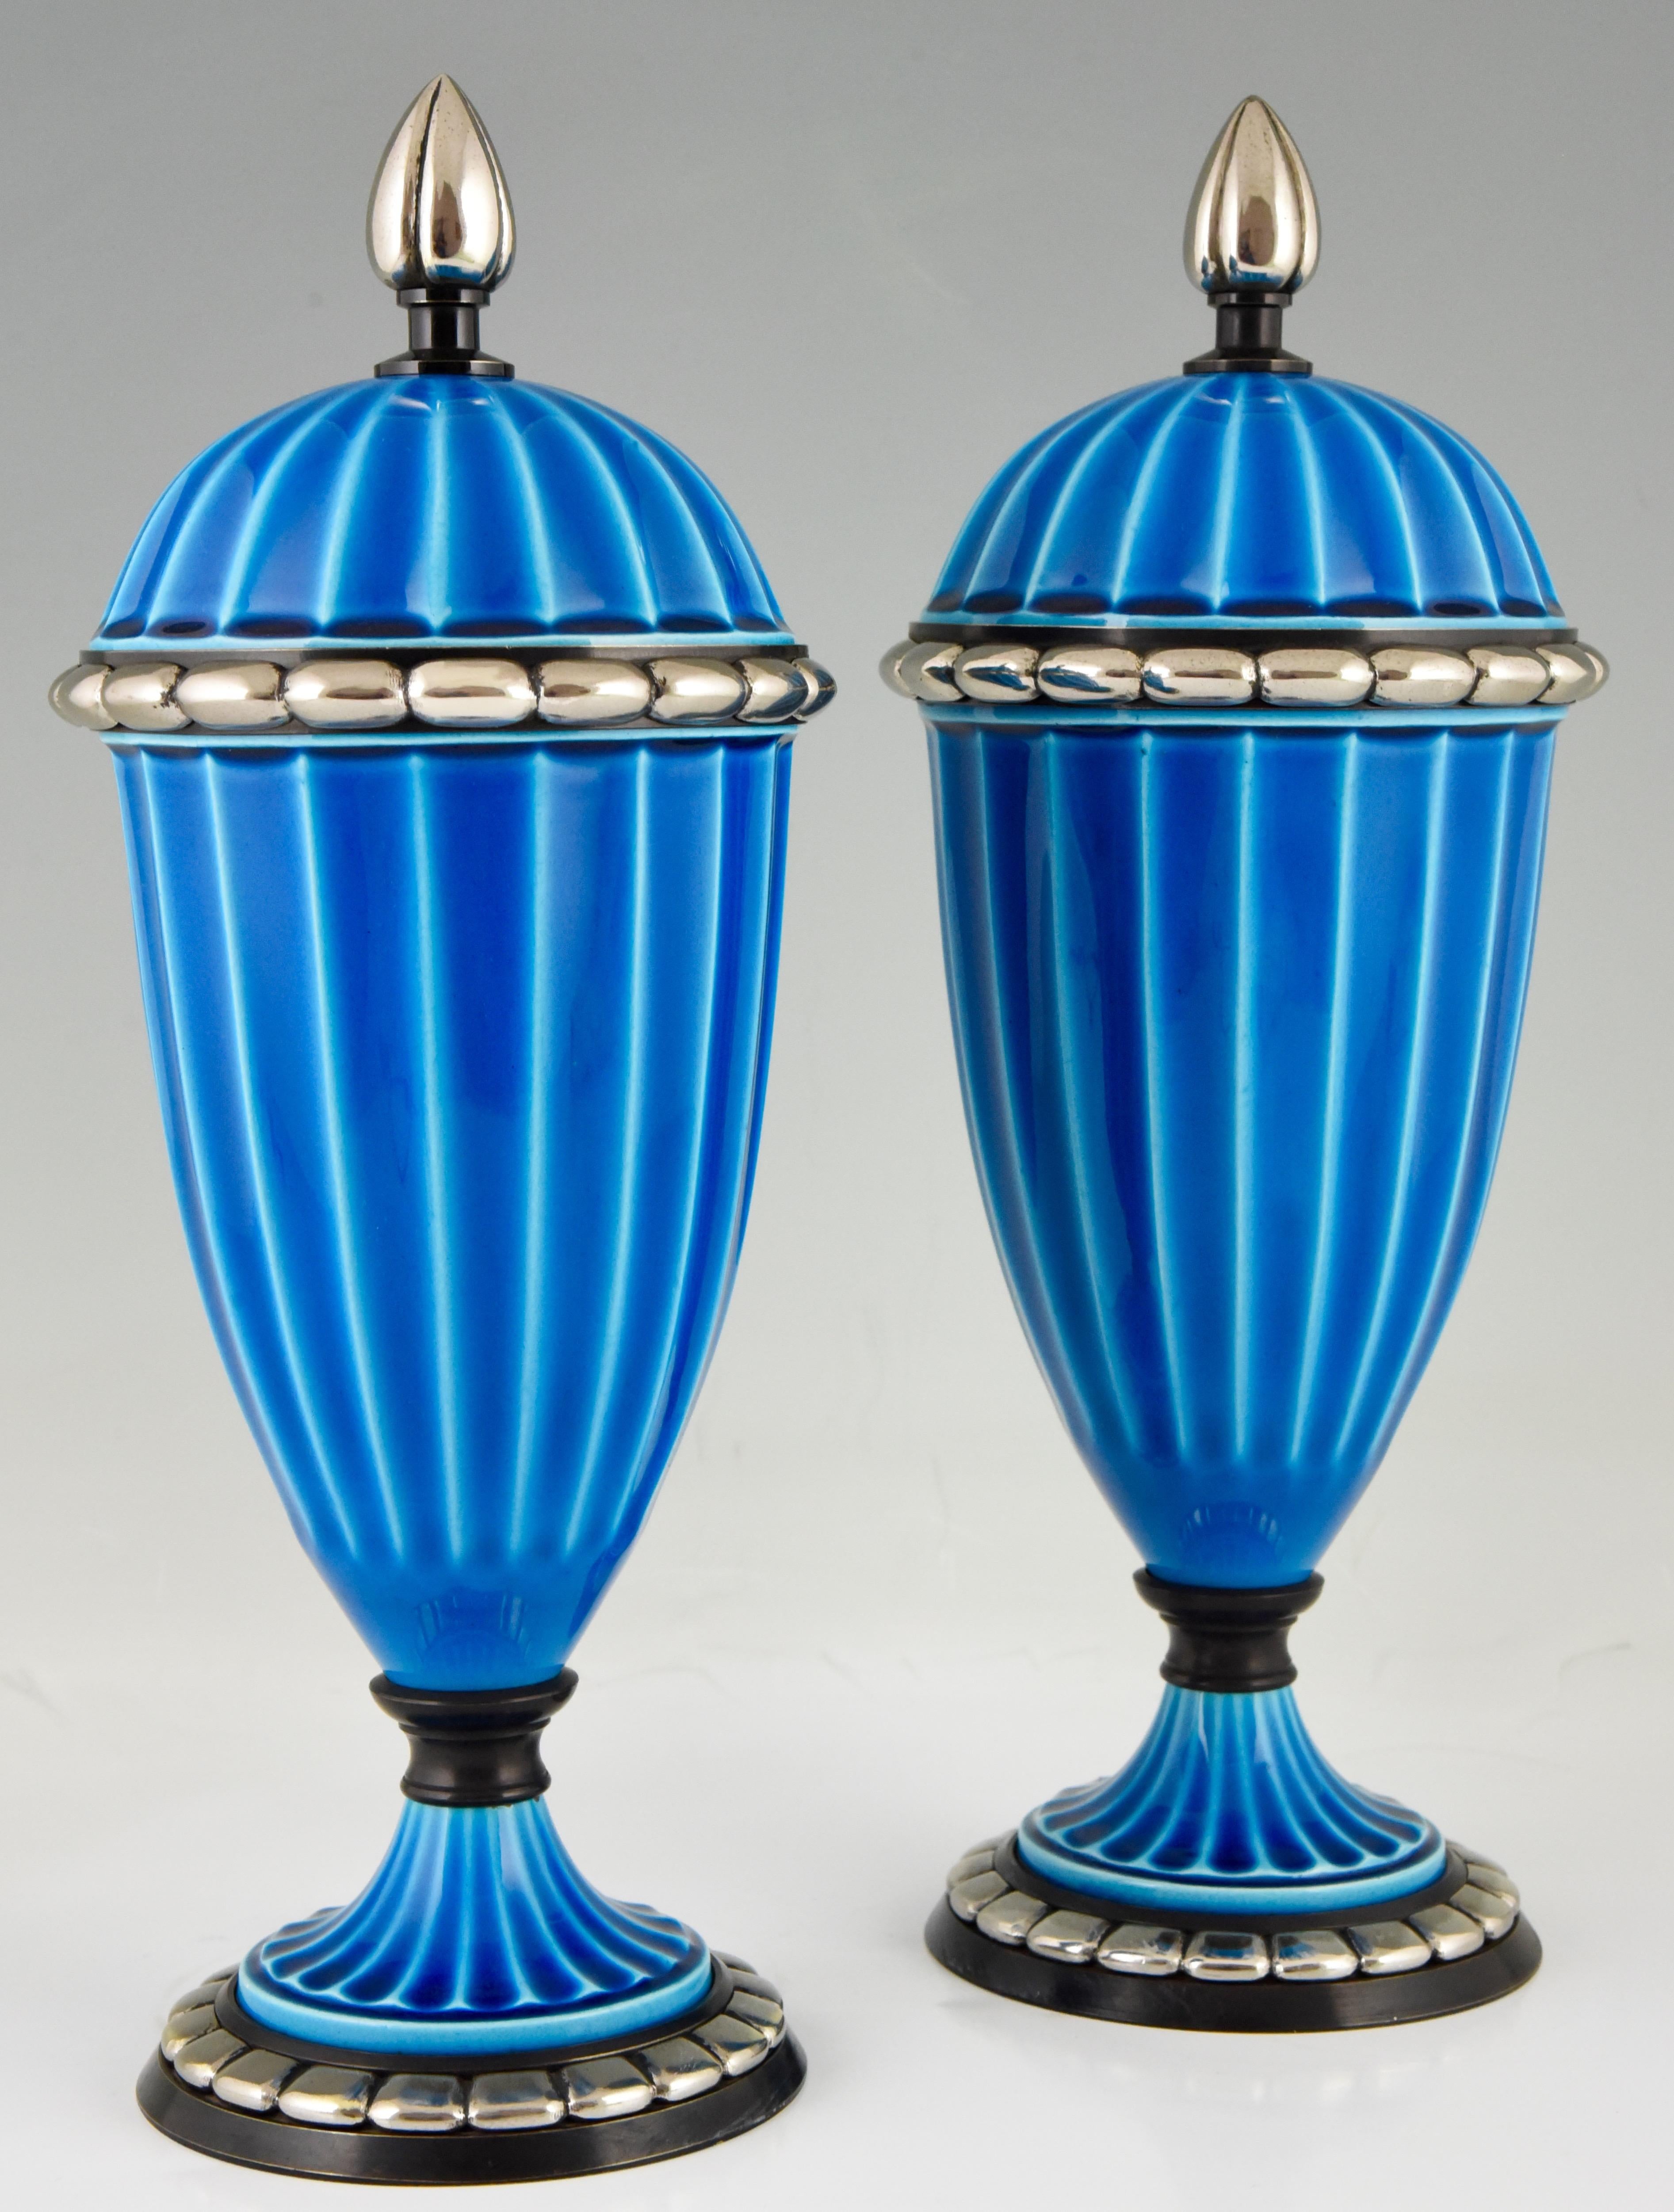 French Pair of Art Deco Ceramic Vases or Urns with Blue Glaze Paul Milet for Sèvres